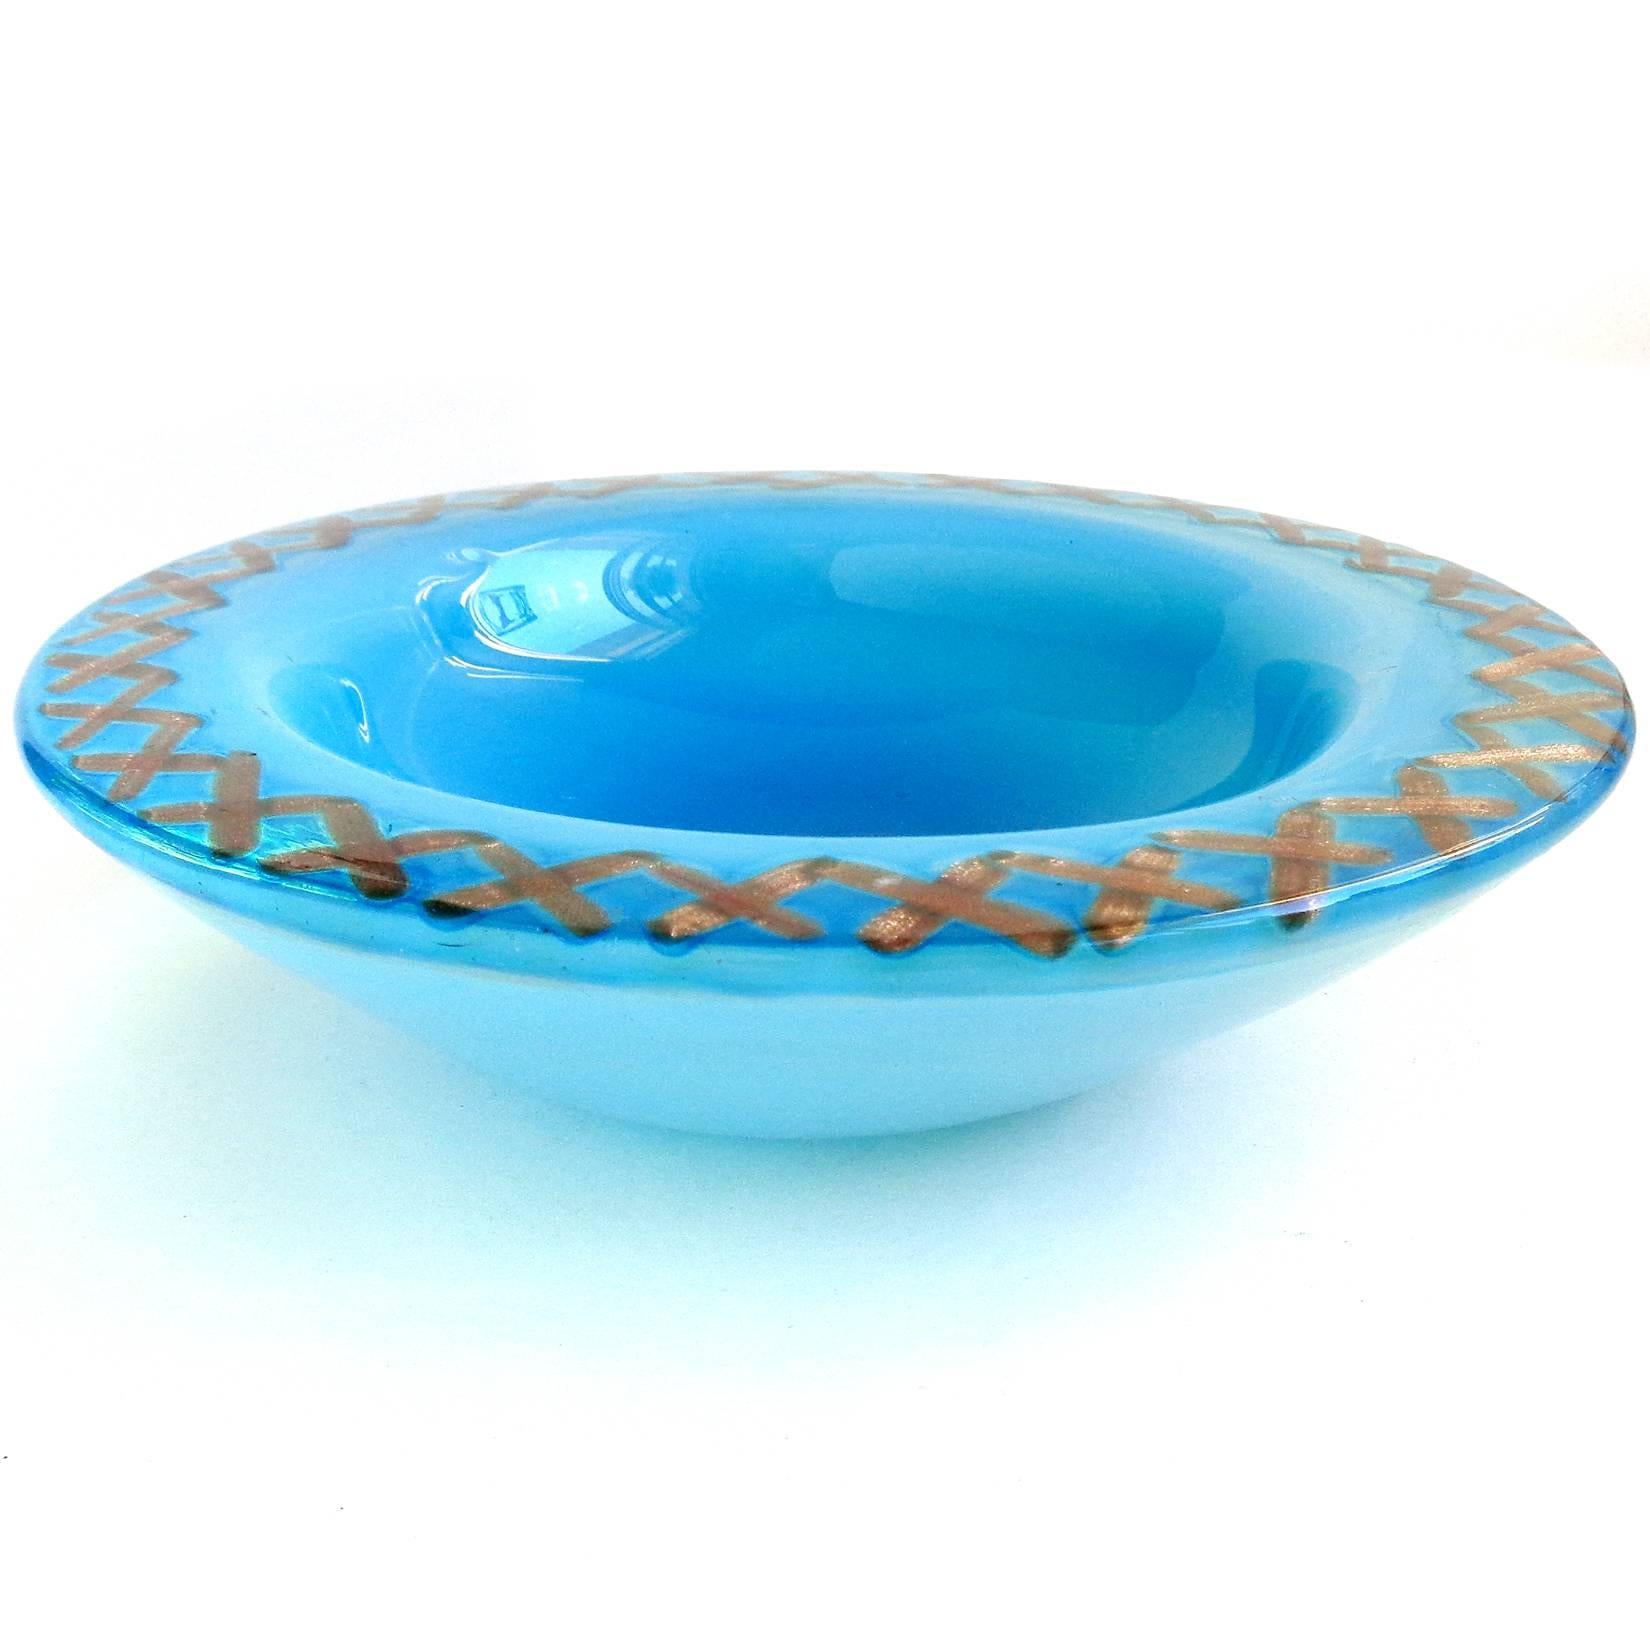 Murano handblown opalescent blue and aventurine flecks Italian art glass bowl with unique cross - stitch rim design. Attributed to the Fratelli Toso Company. Very unusual design. Would be a great gift for the seamstress or needlework collector in